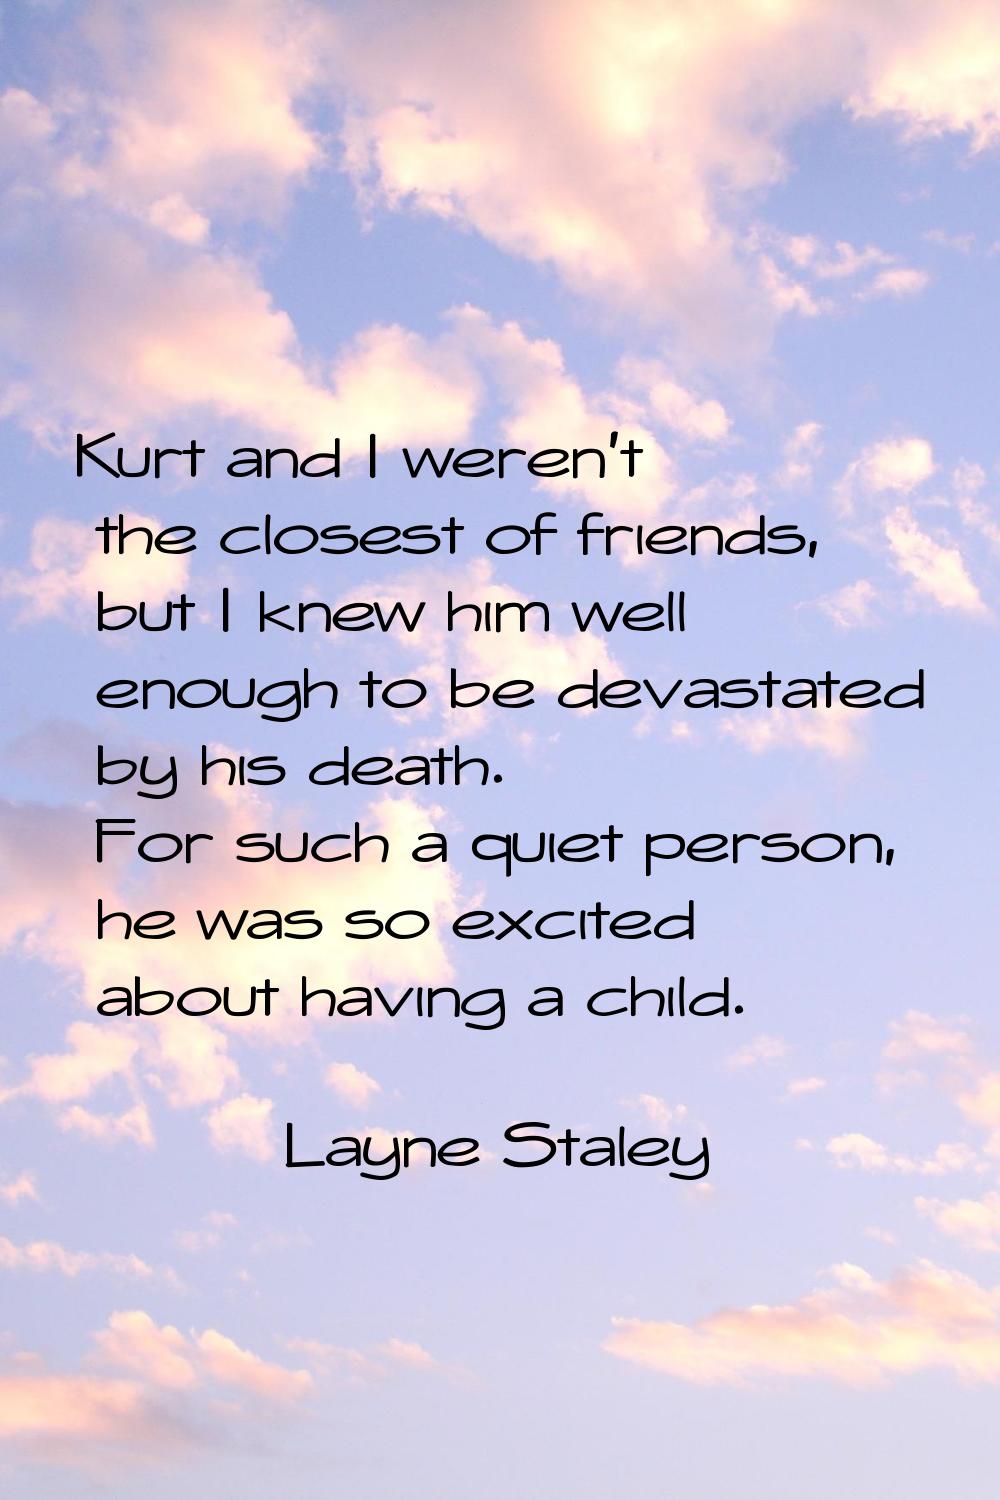 Kurt and I weren't the closest of friends, but I knew him well enough to be devastated by his death